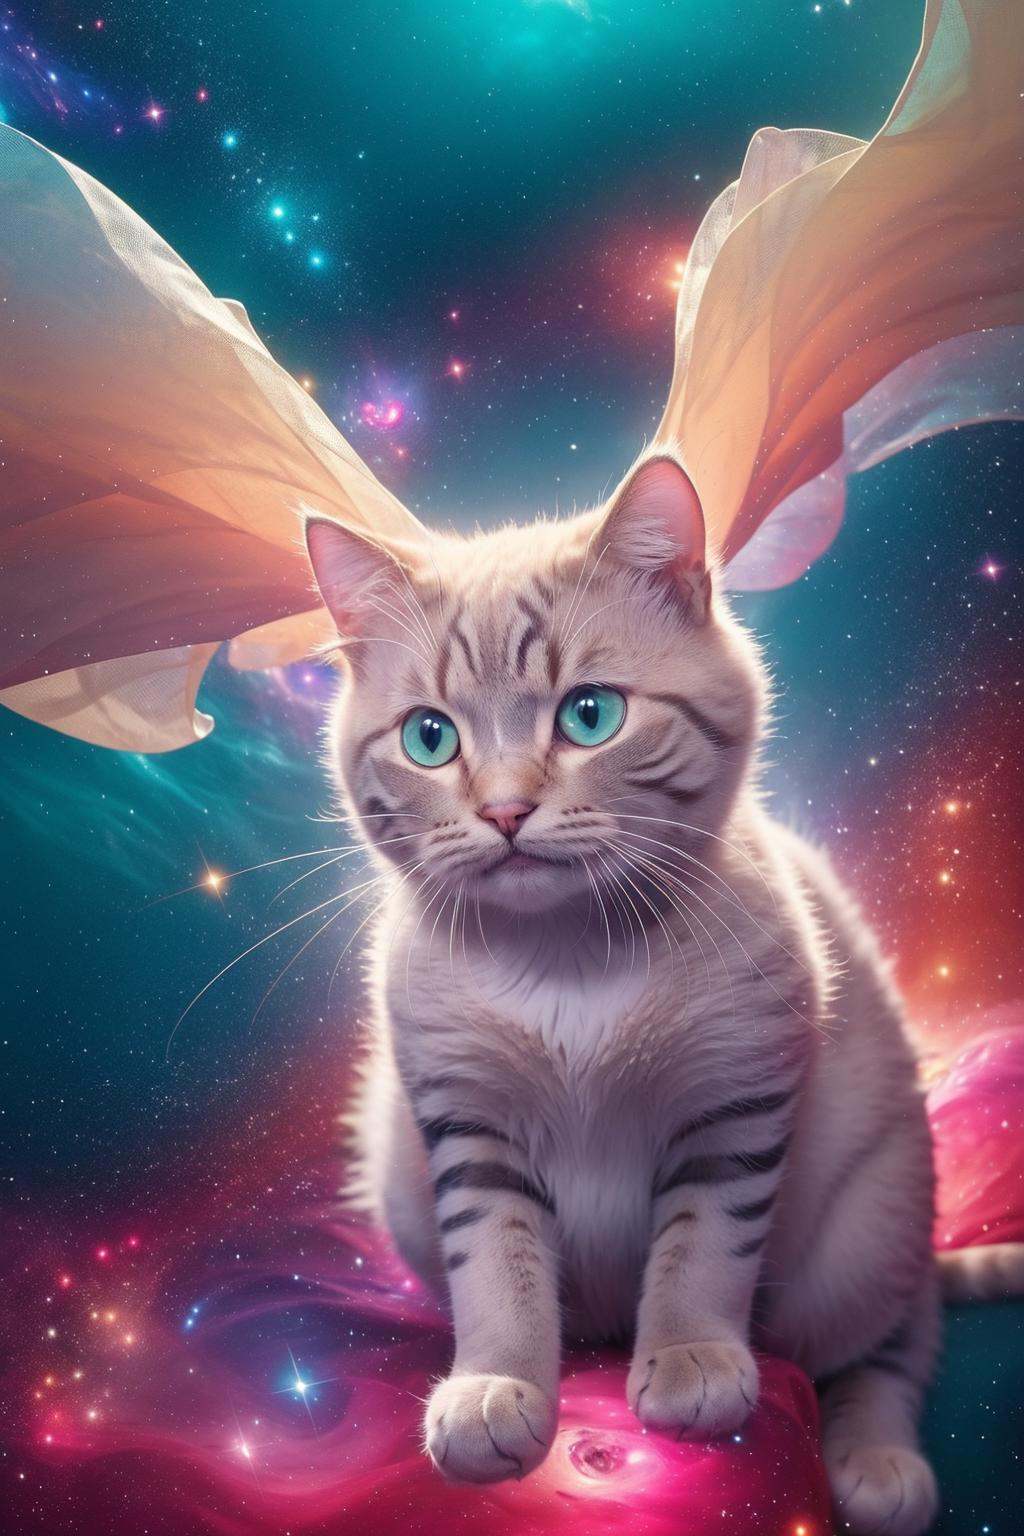 Master piece, high quality, a cute cat, photo realistic, cosmos